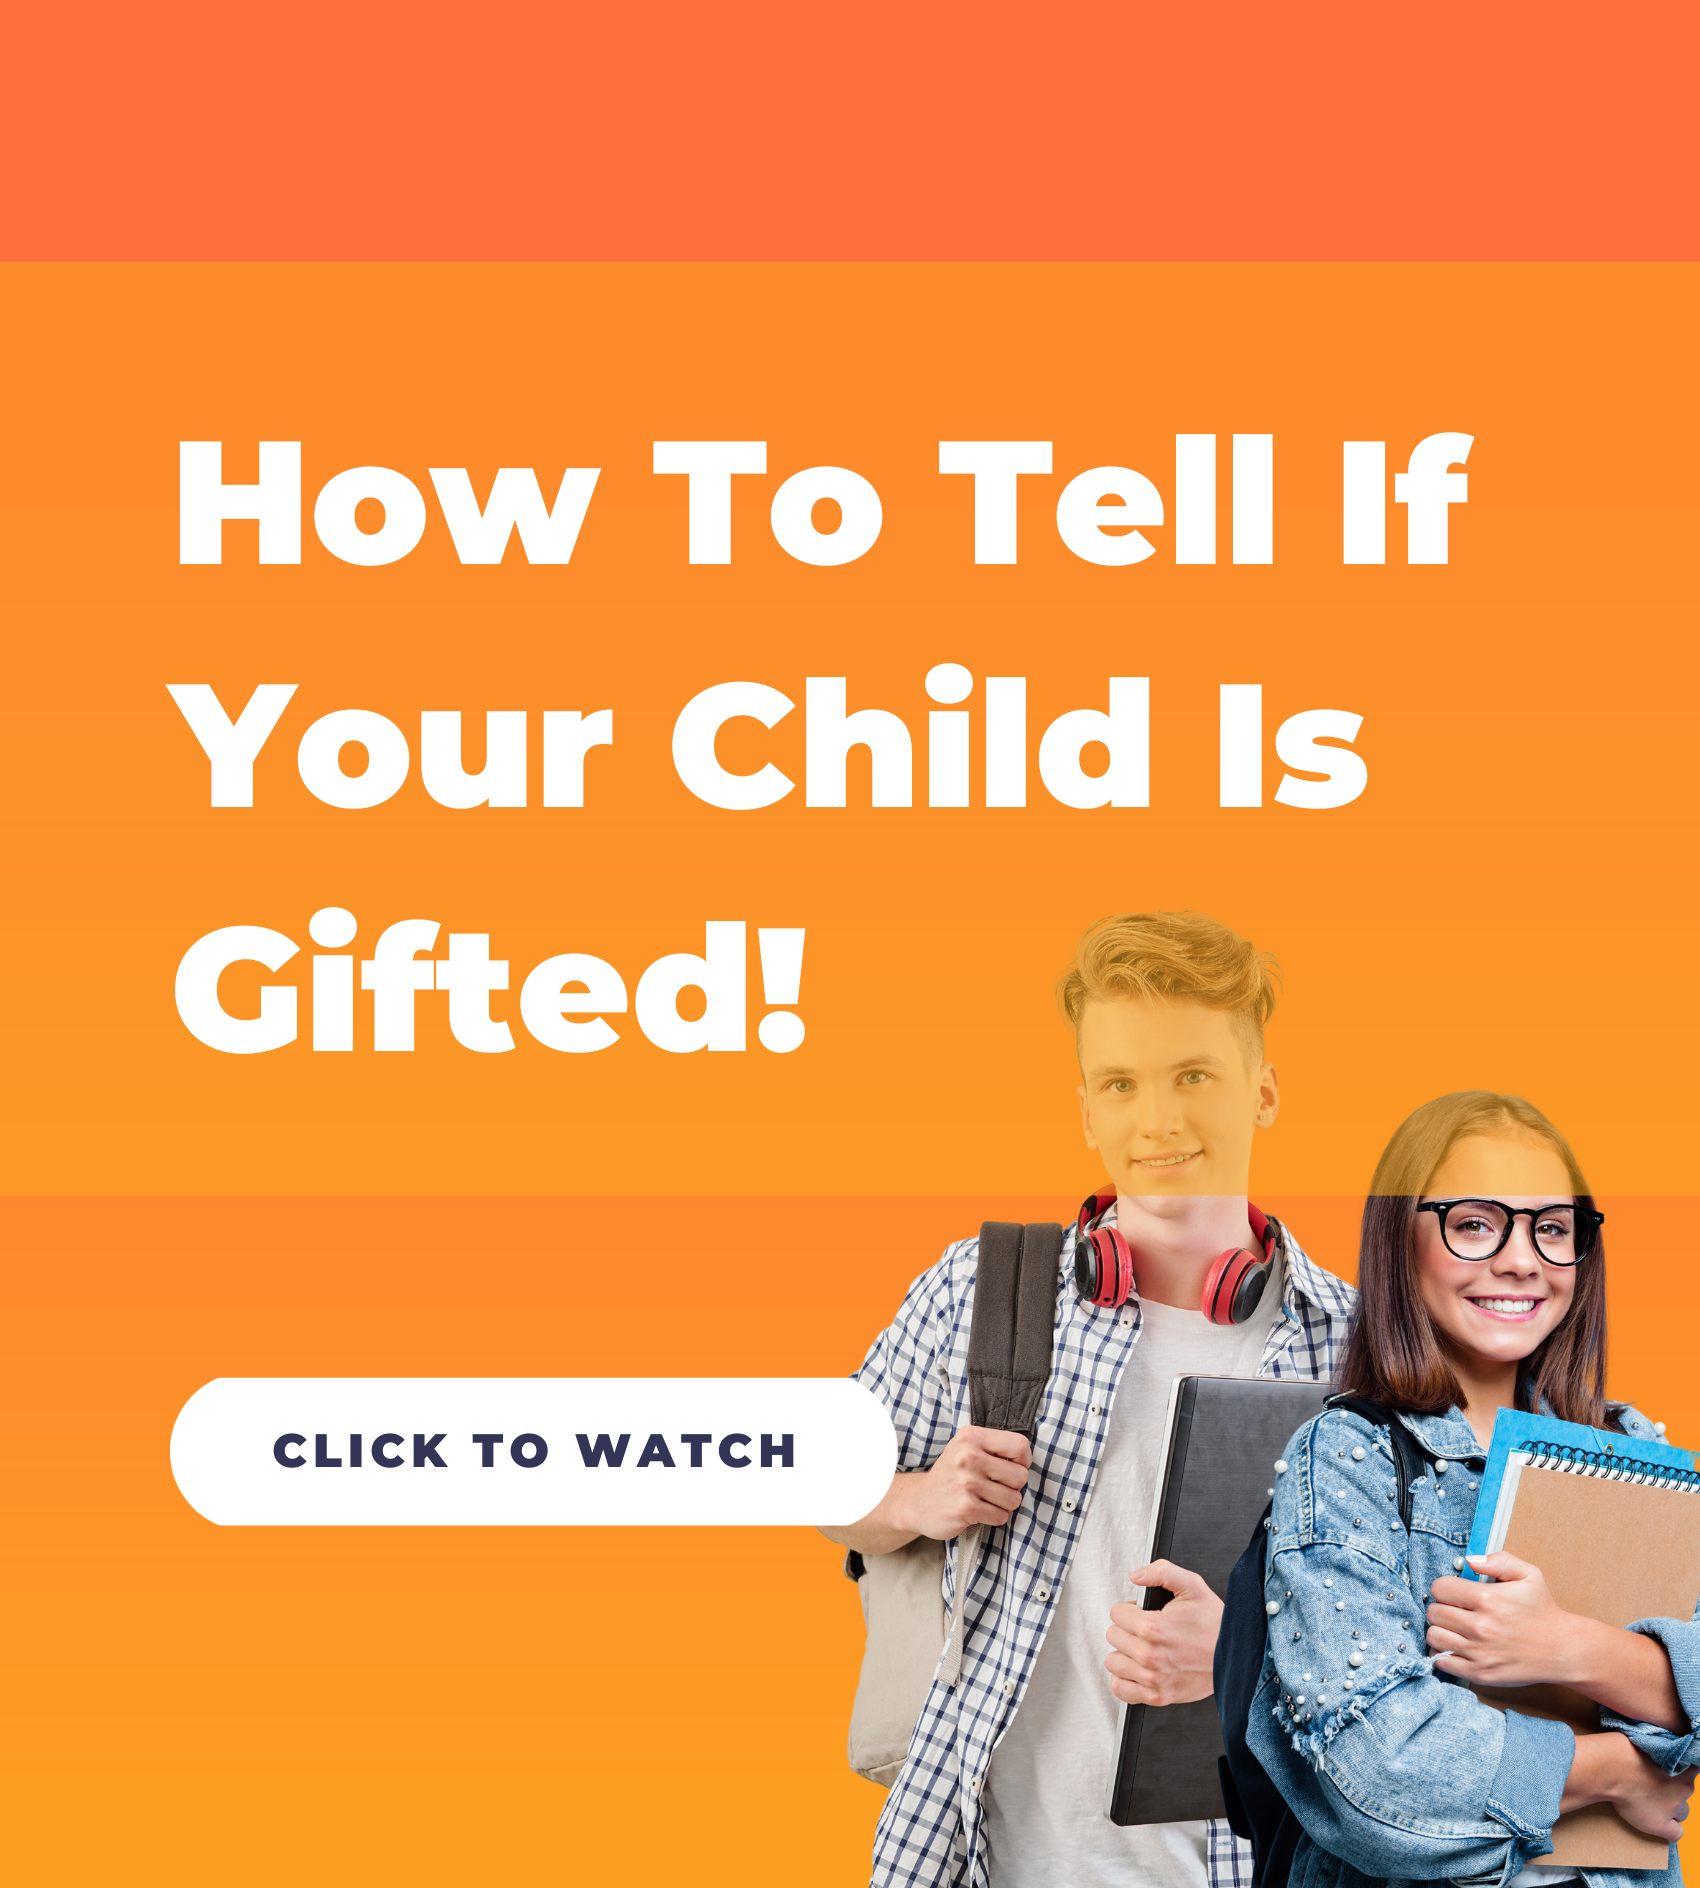 How To Tell If Your Child Is Gifted